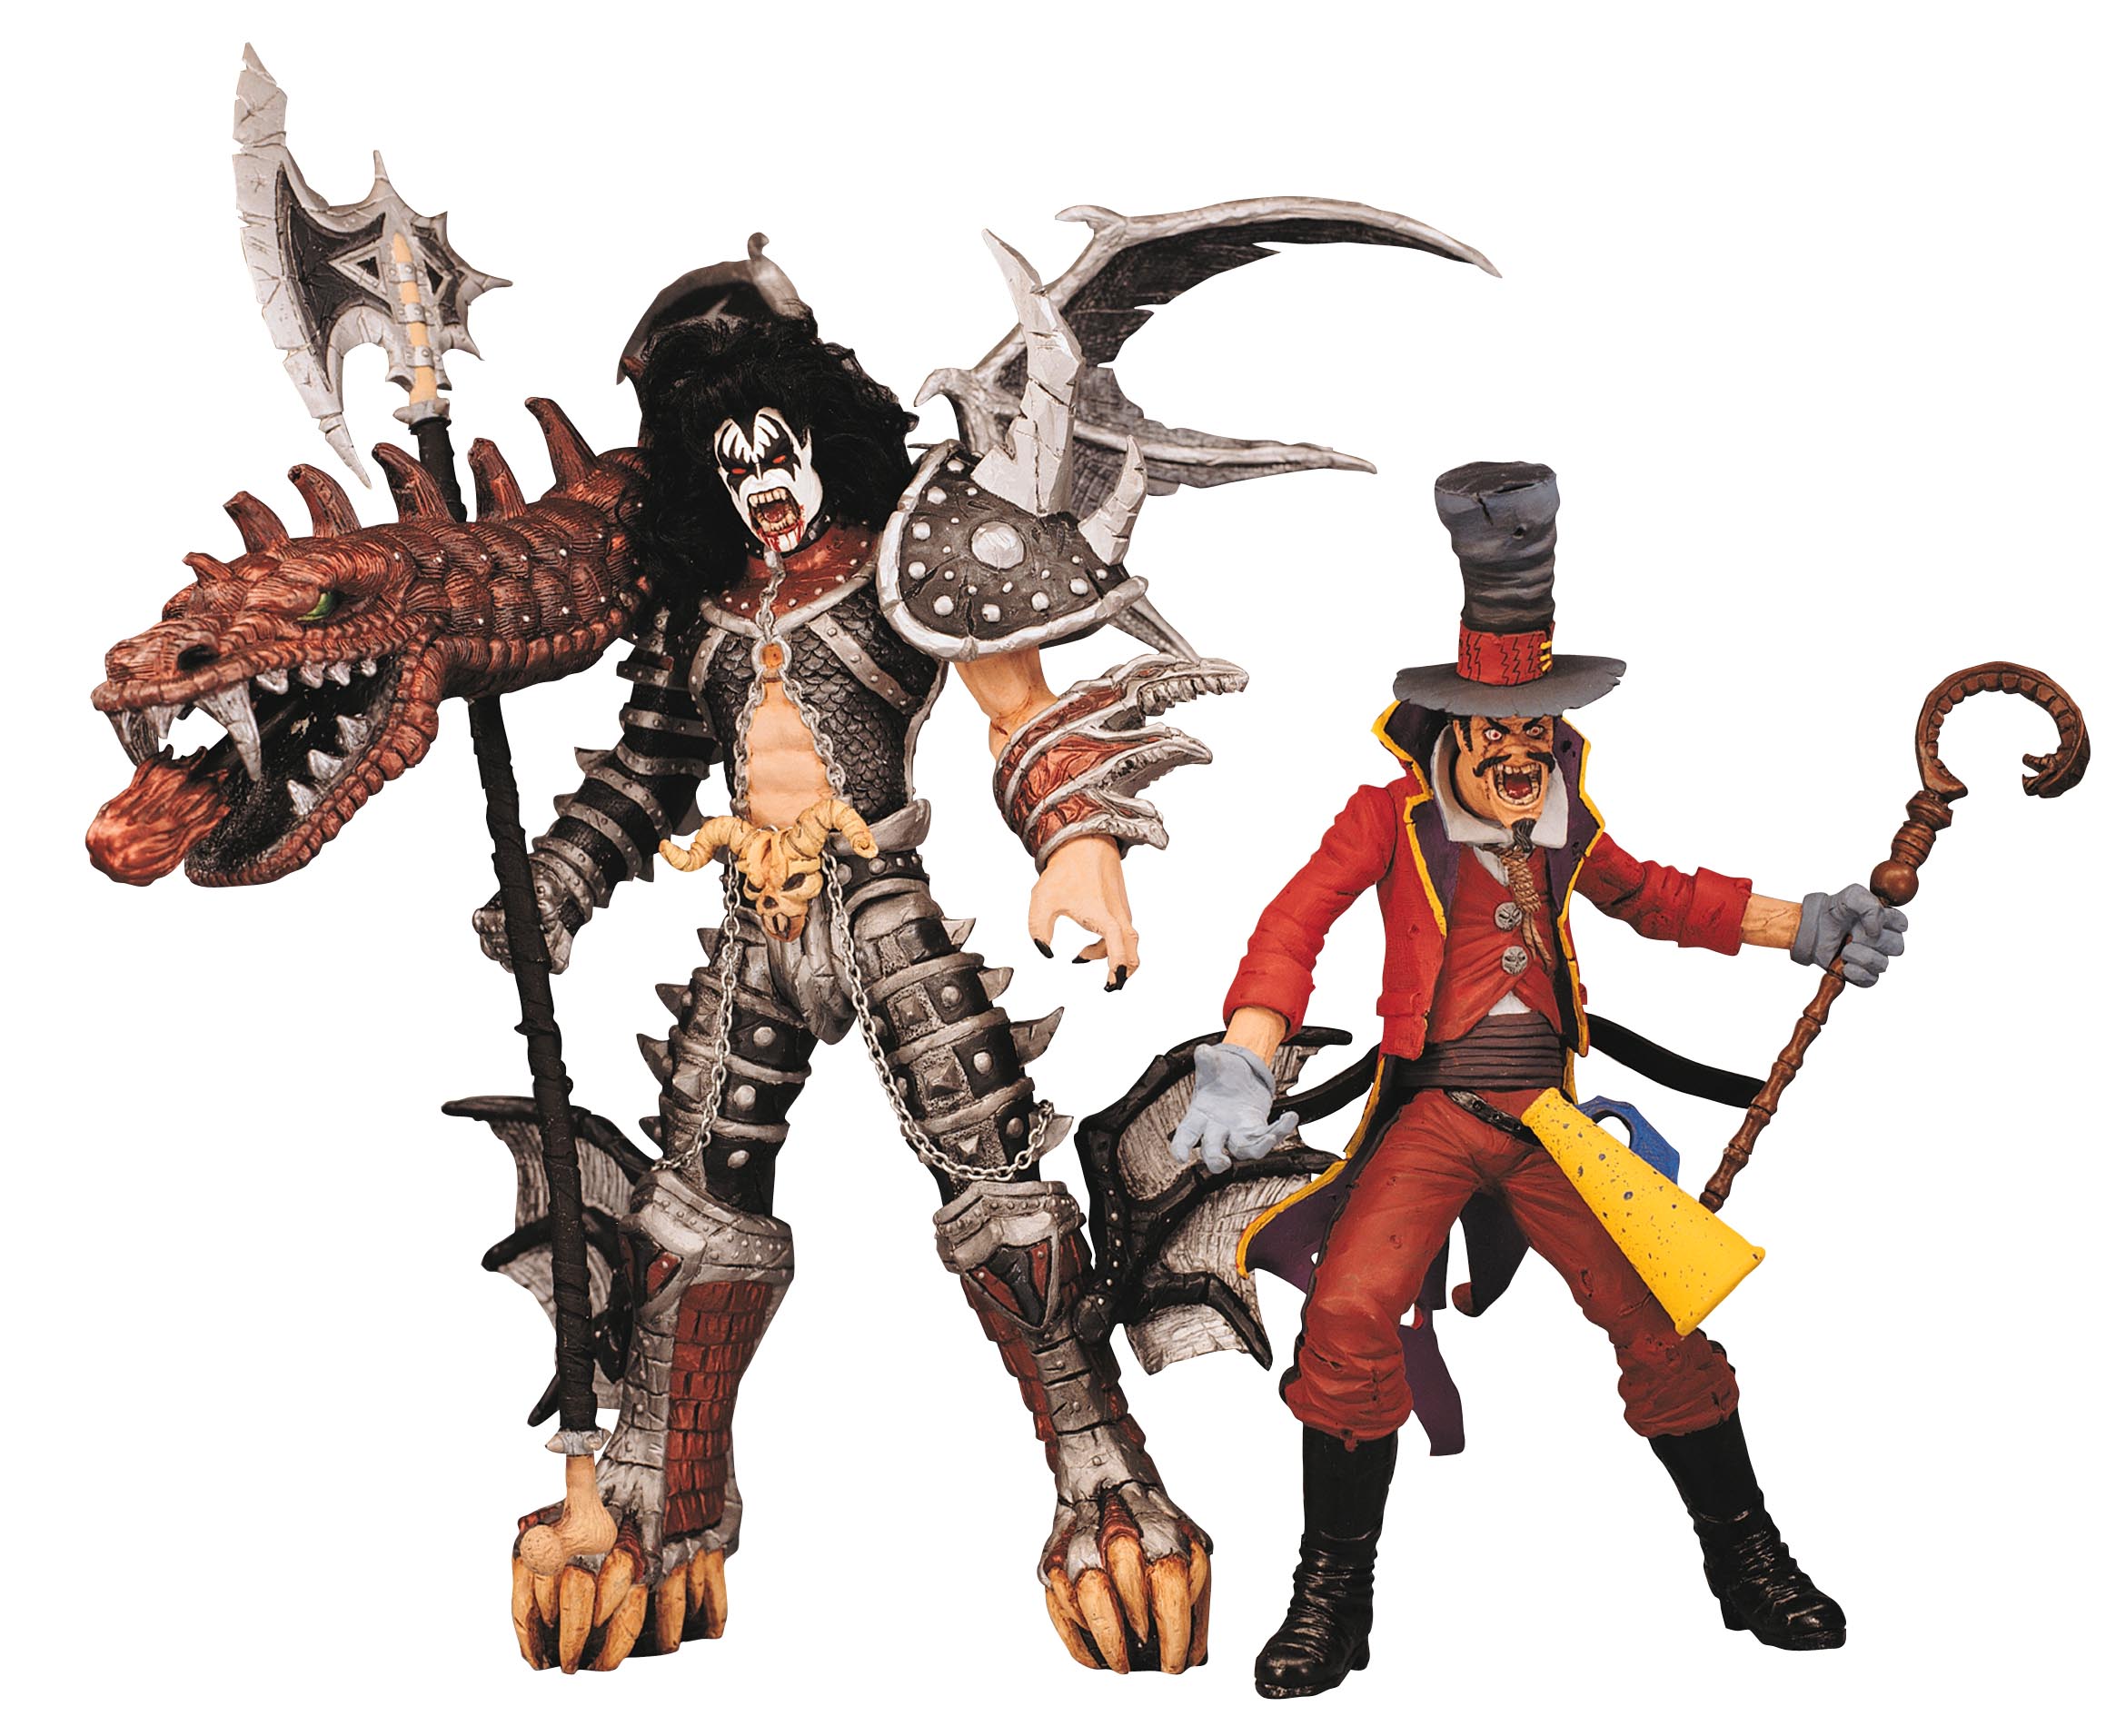 Kiss Psycho Circus Tour Edition Set of 4 Action Figures McFarlane Toys MISB 1998 for sale online